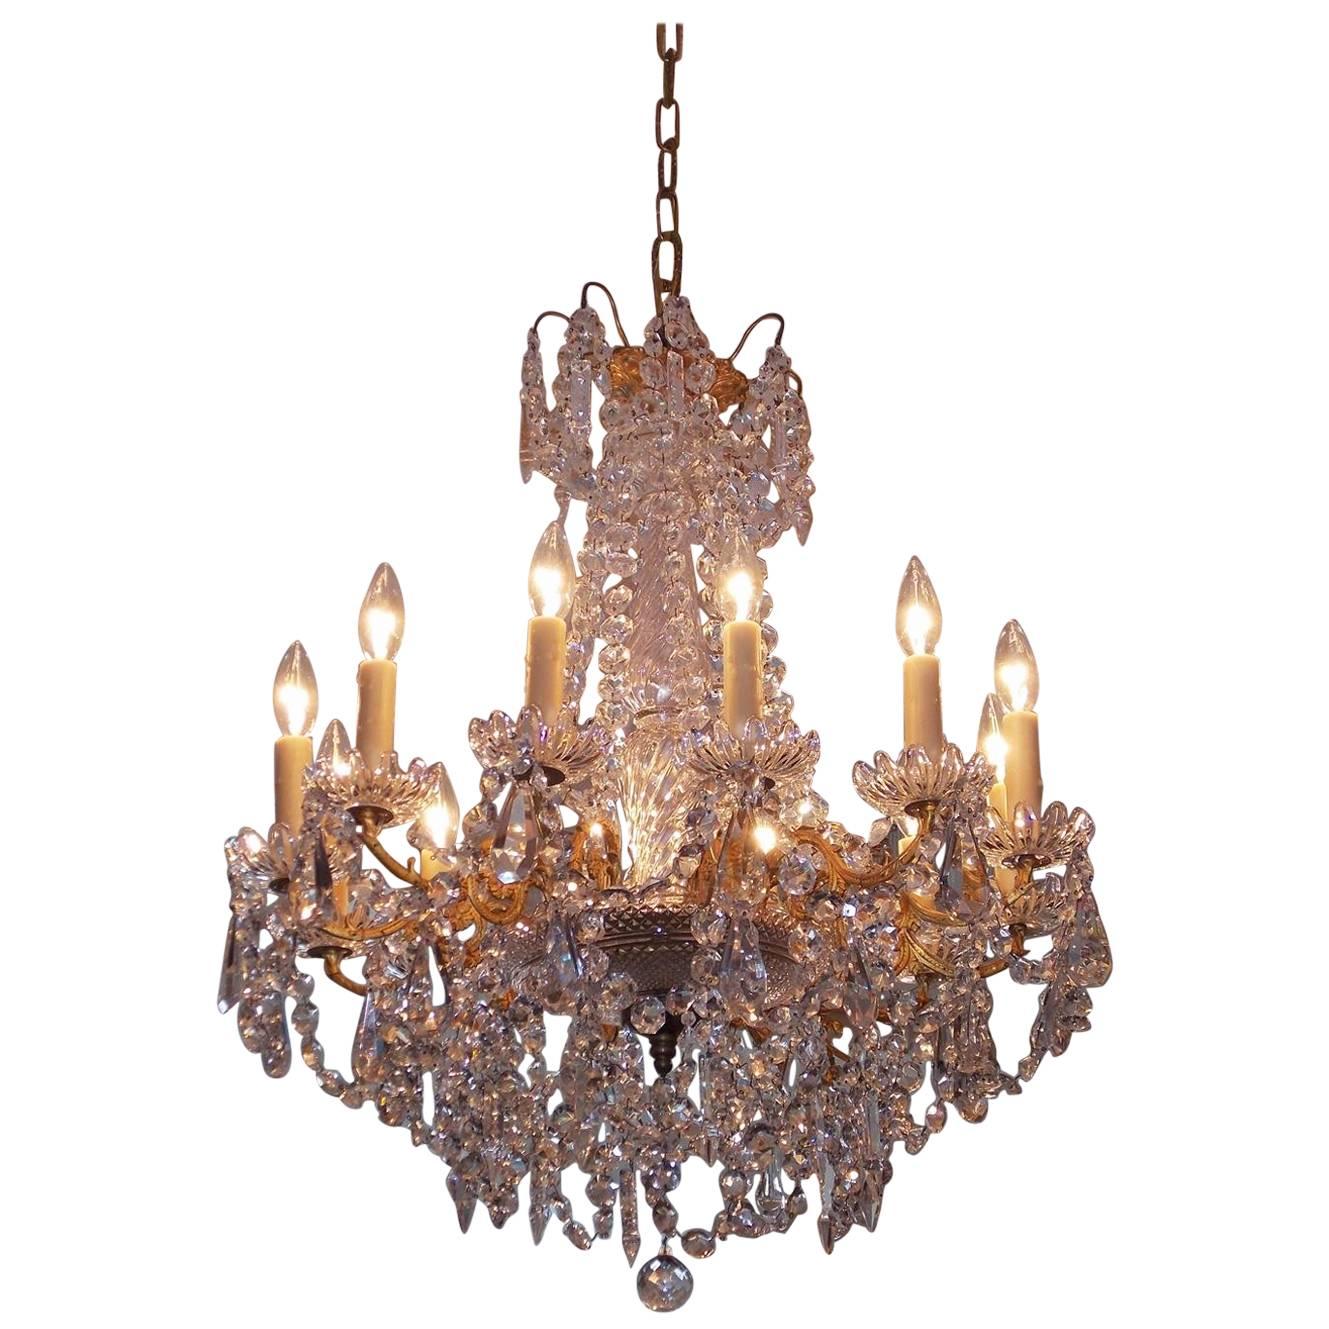 French Baccarat Gilt Bronze and Crystal Twelve-Arm Chandelier, Circa 1840